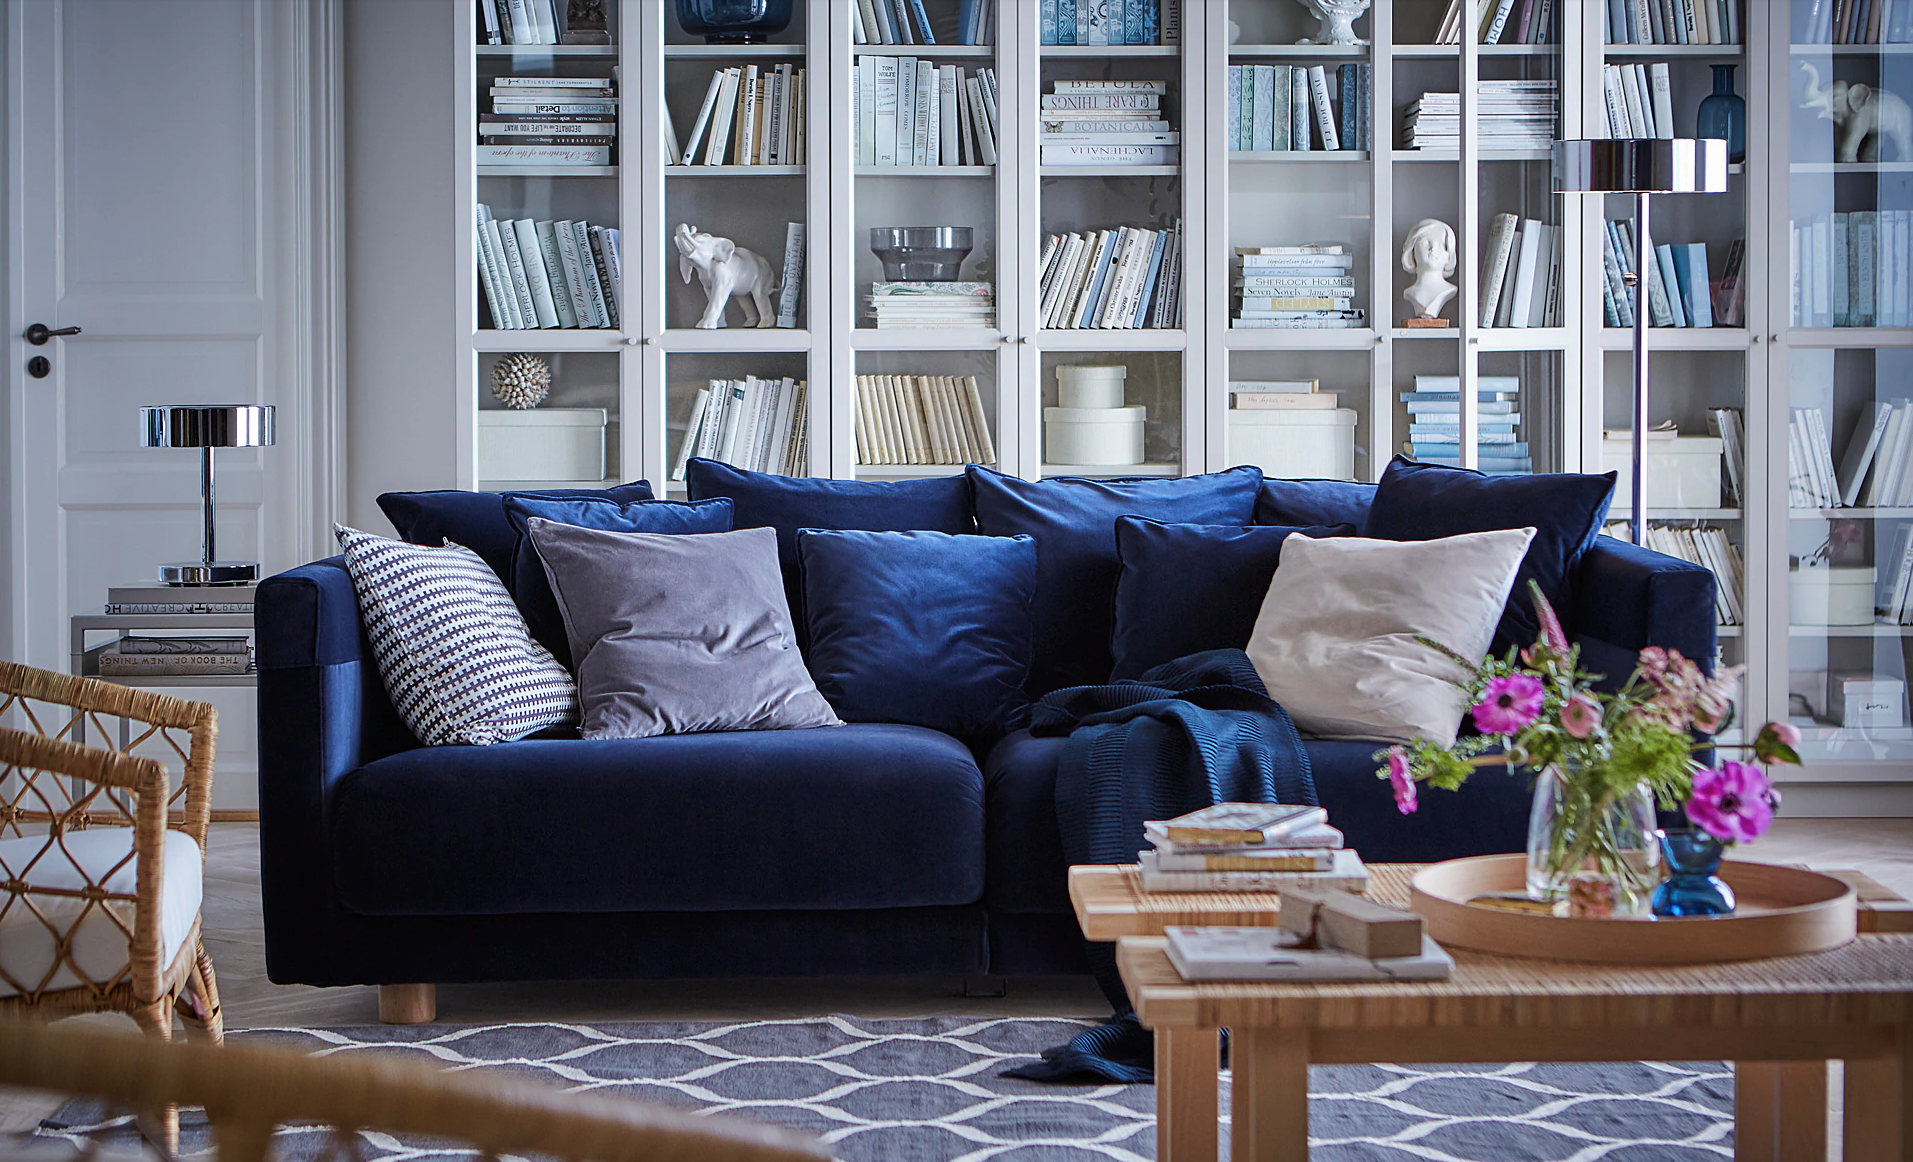 16 Best Comfy Couches And Chairs Coziest Furniture To Buy